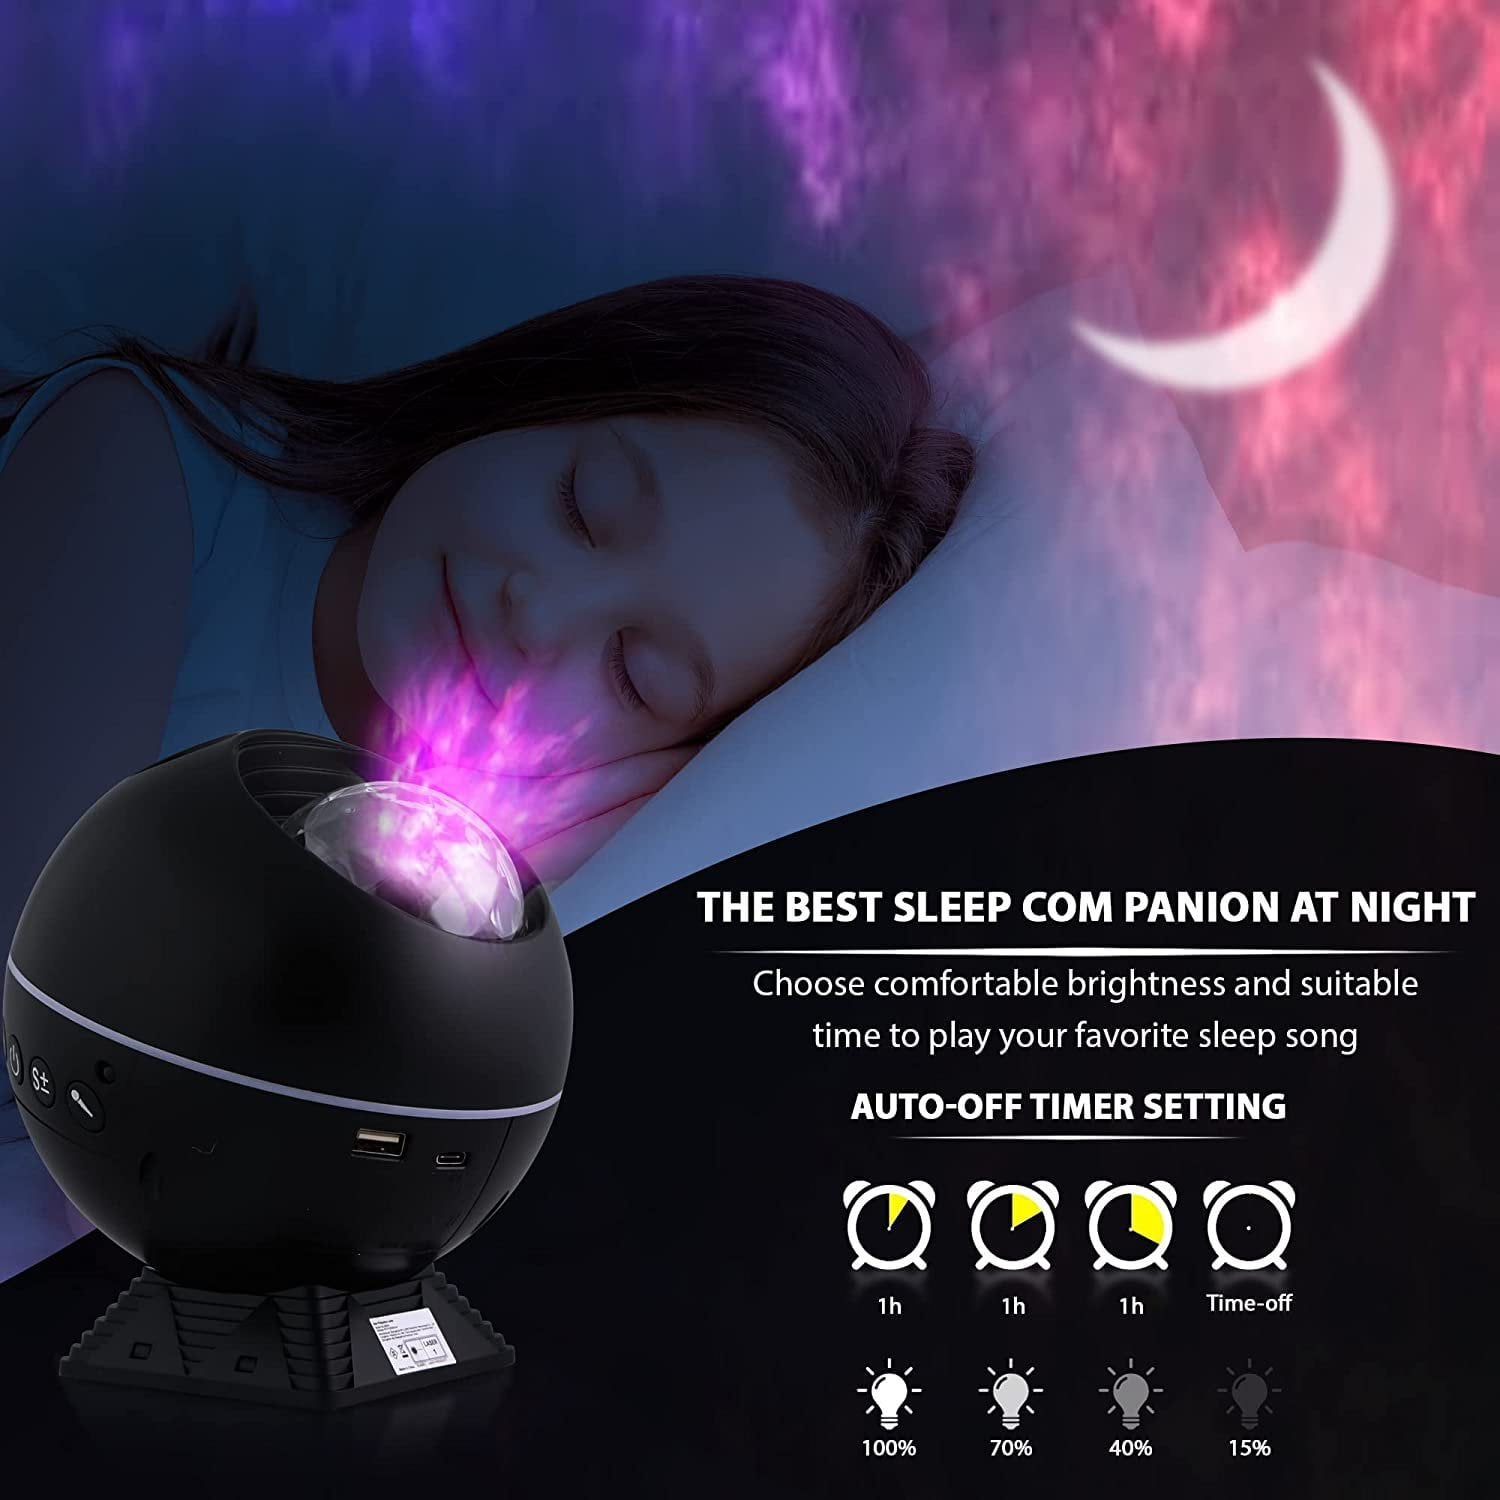 Rossetta Star Projector Next Generation Galaxy Projector Night Light,  Remote Control & 10 White Noise Sounds, Firefly Stars